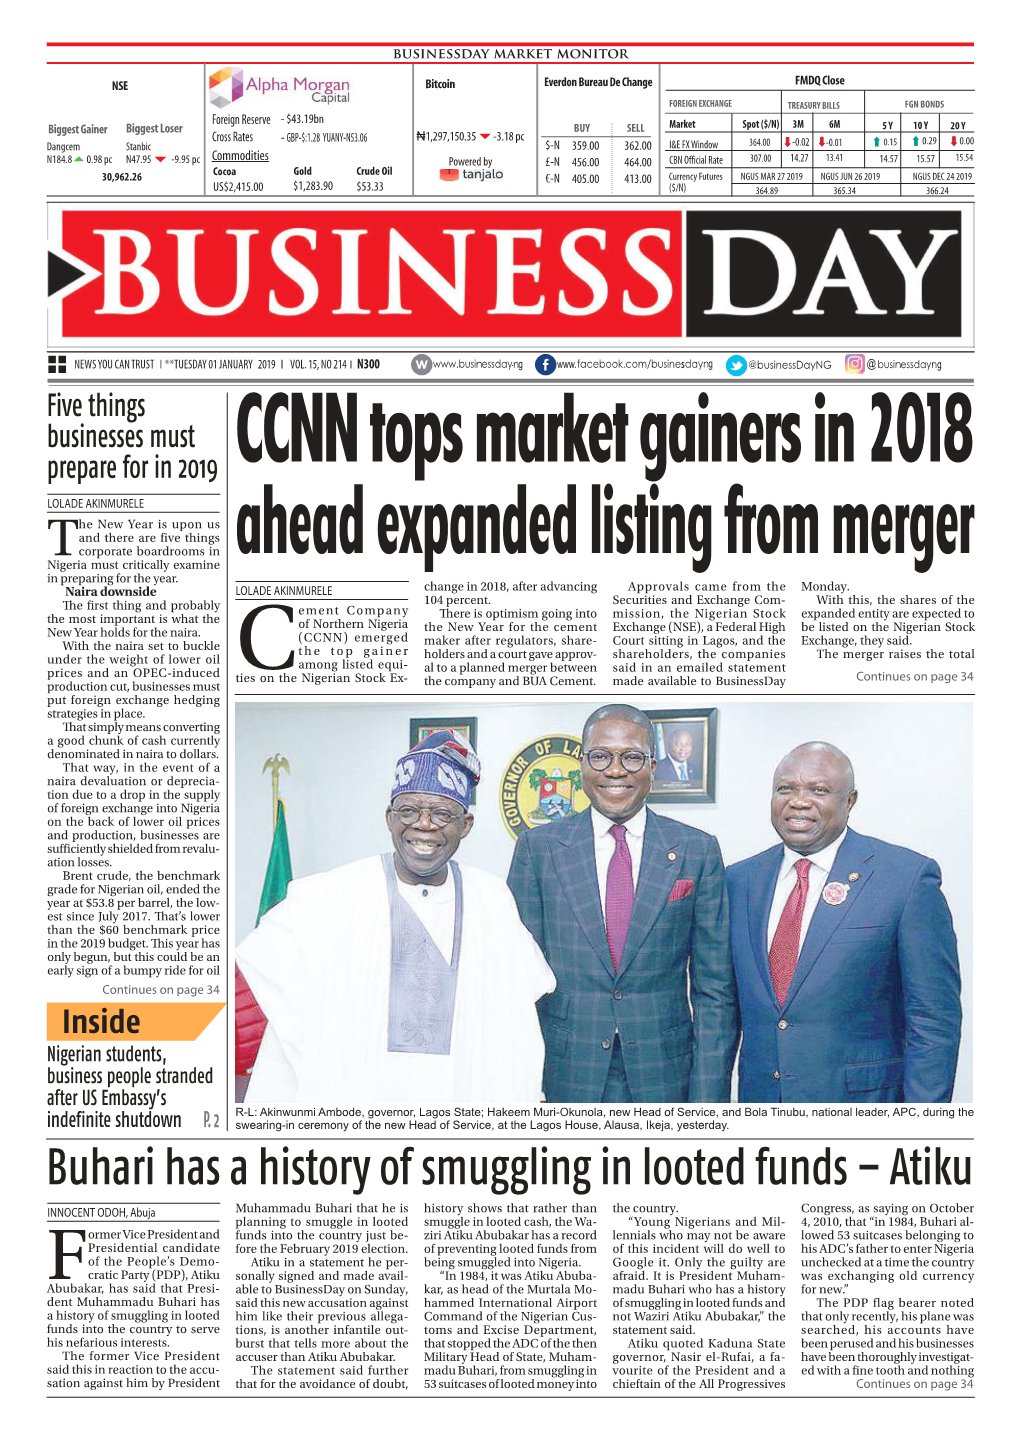 Buhari Has a History of Smuggling in Looted Funds – Atiku INNOCENT ODOH, Abuja Muhammadu Buhari That He Is History Shows That Rather Than the Country